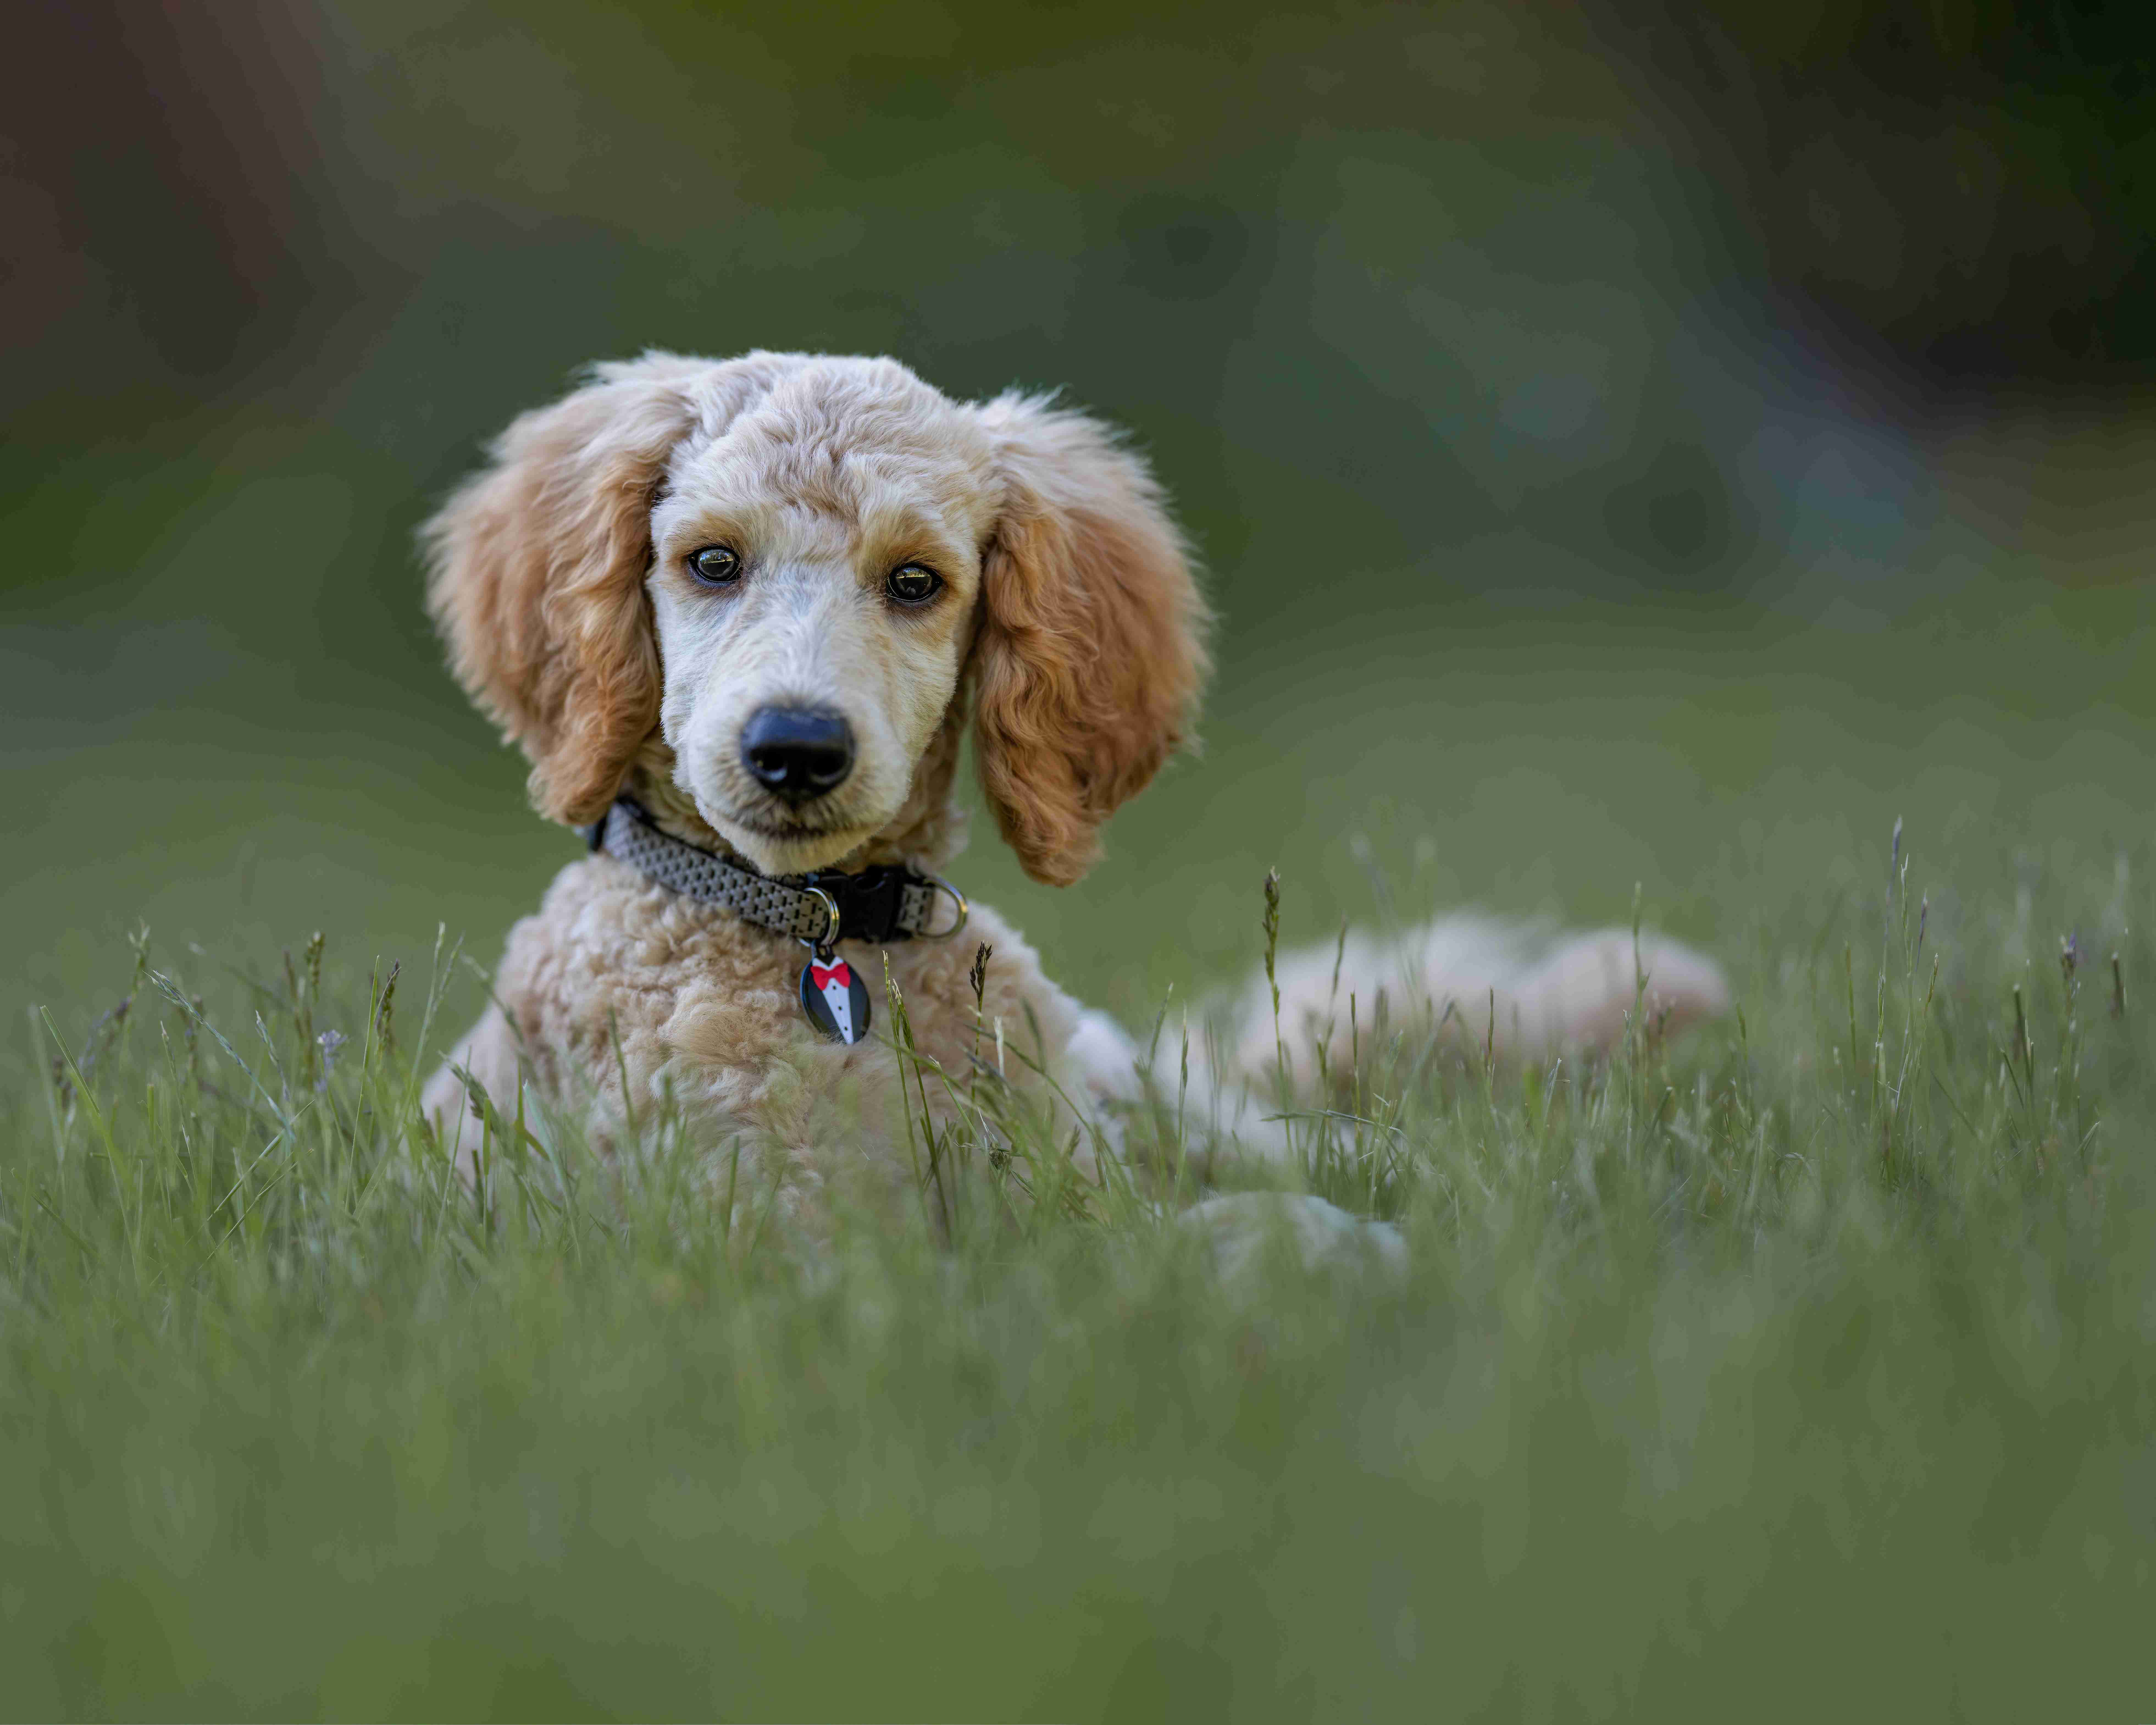 How did you gradually introduce your Poodle puppy to different types of training equipment, such as collars or harnesses?